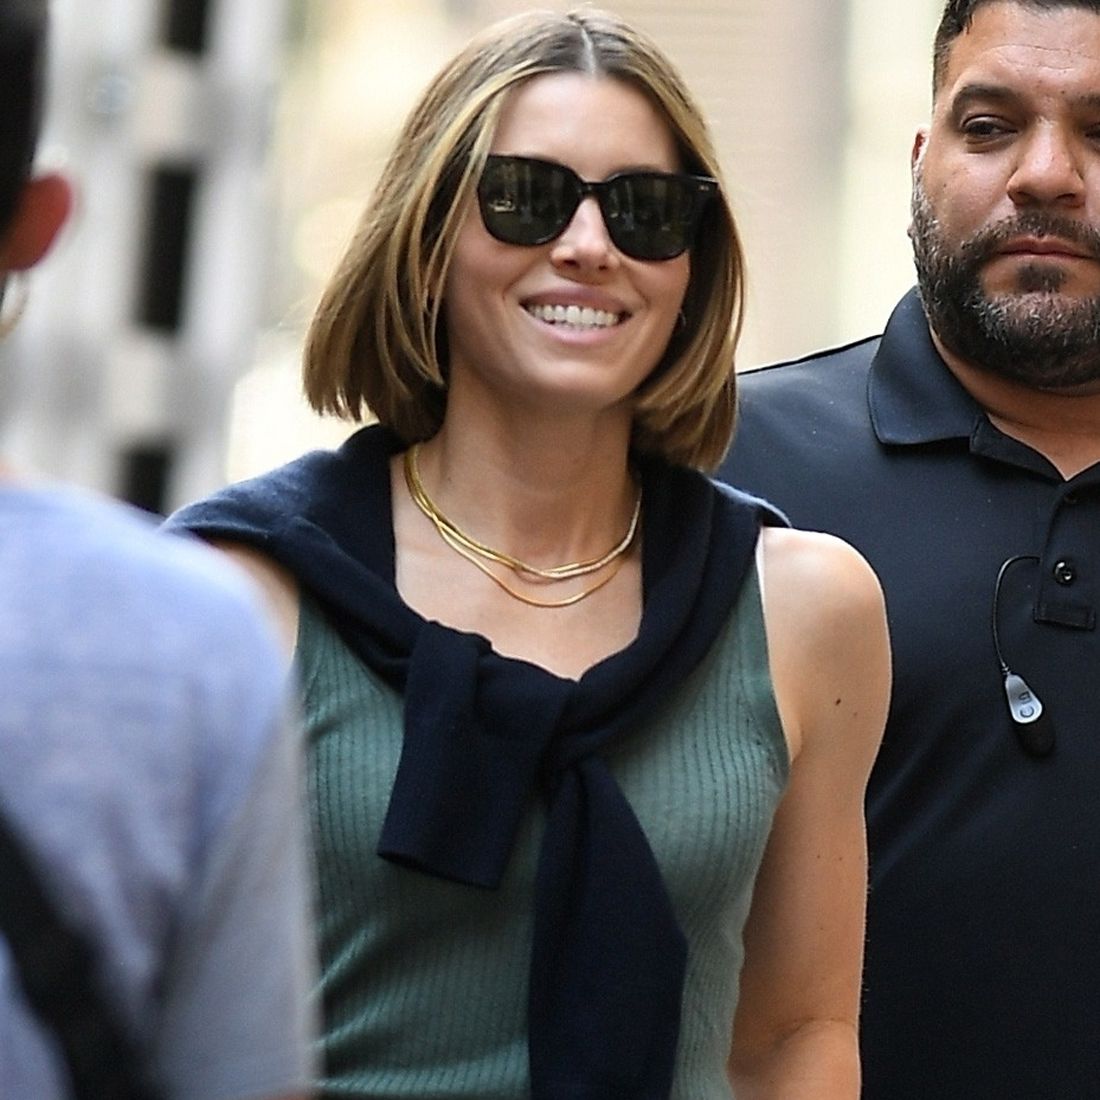 Jessica Biel was seen on the streets of New York getting ready to film her latest project, "The Better Sister." She looked 